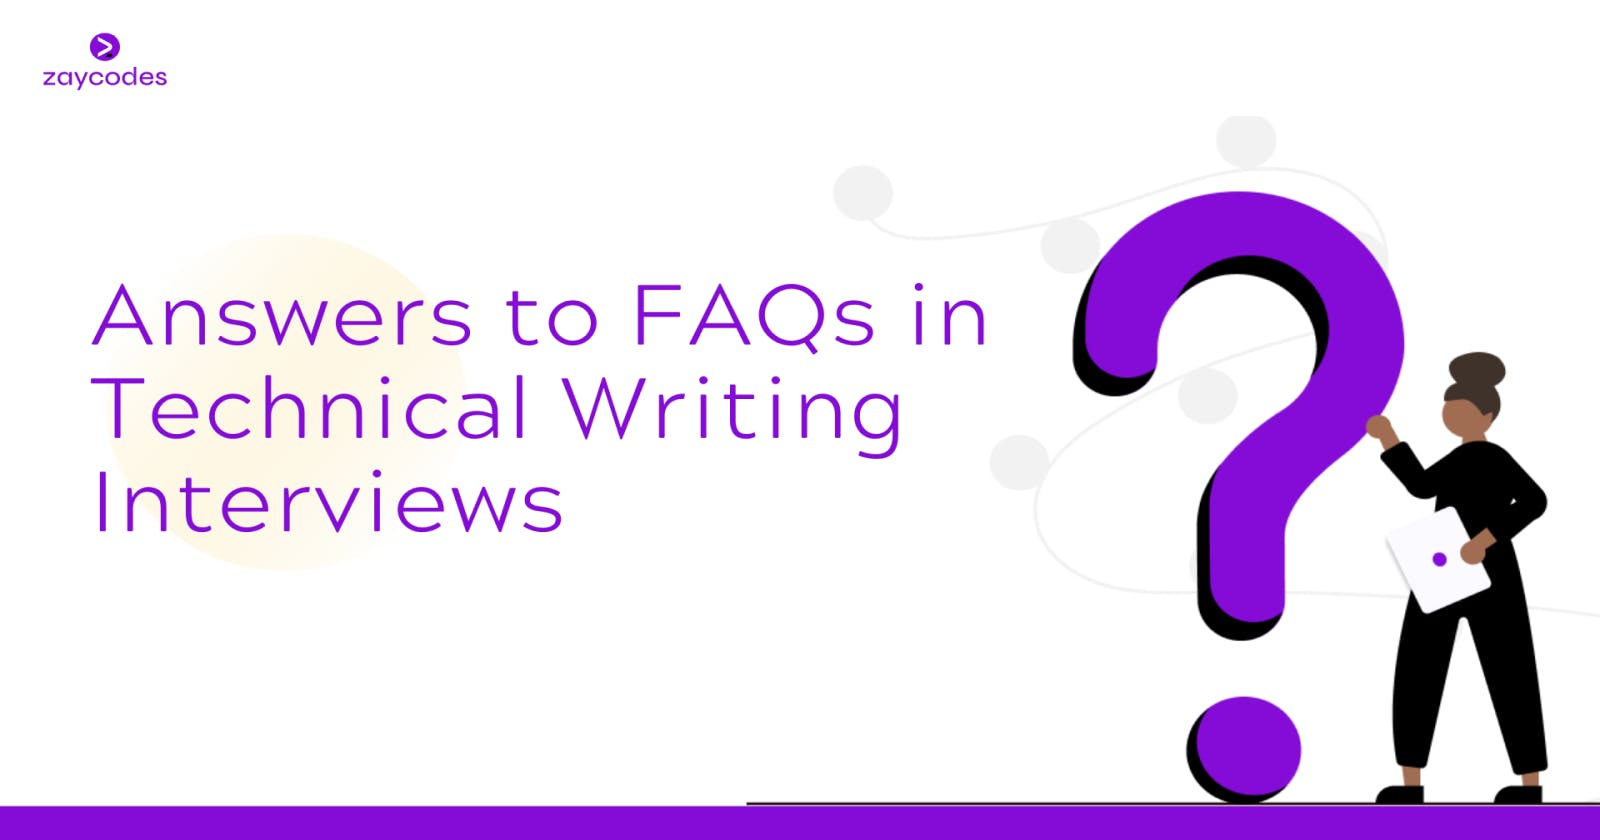 Answers to Frequently Asked Questions in Technical Writing Interviews